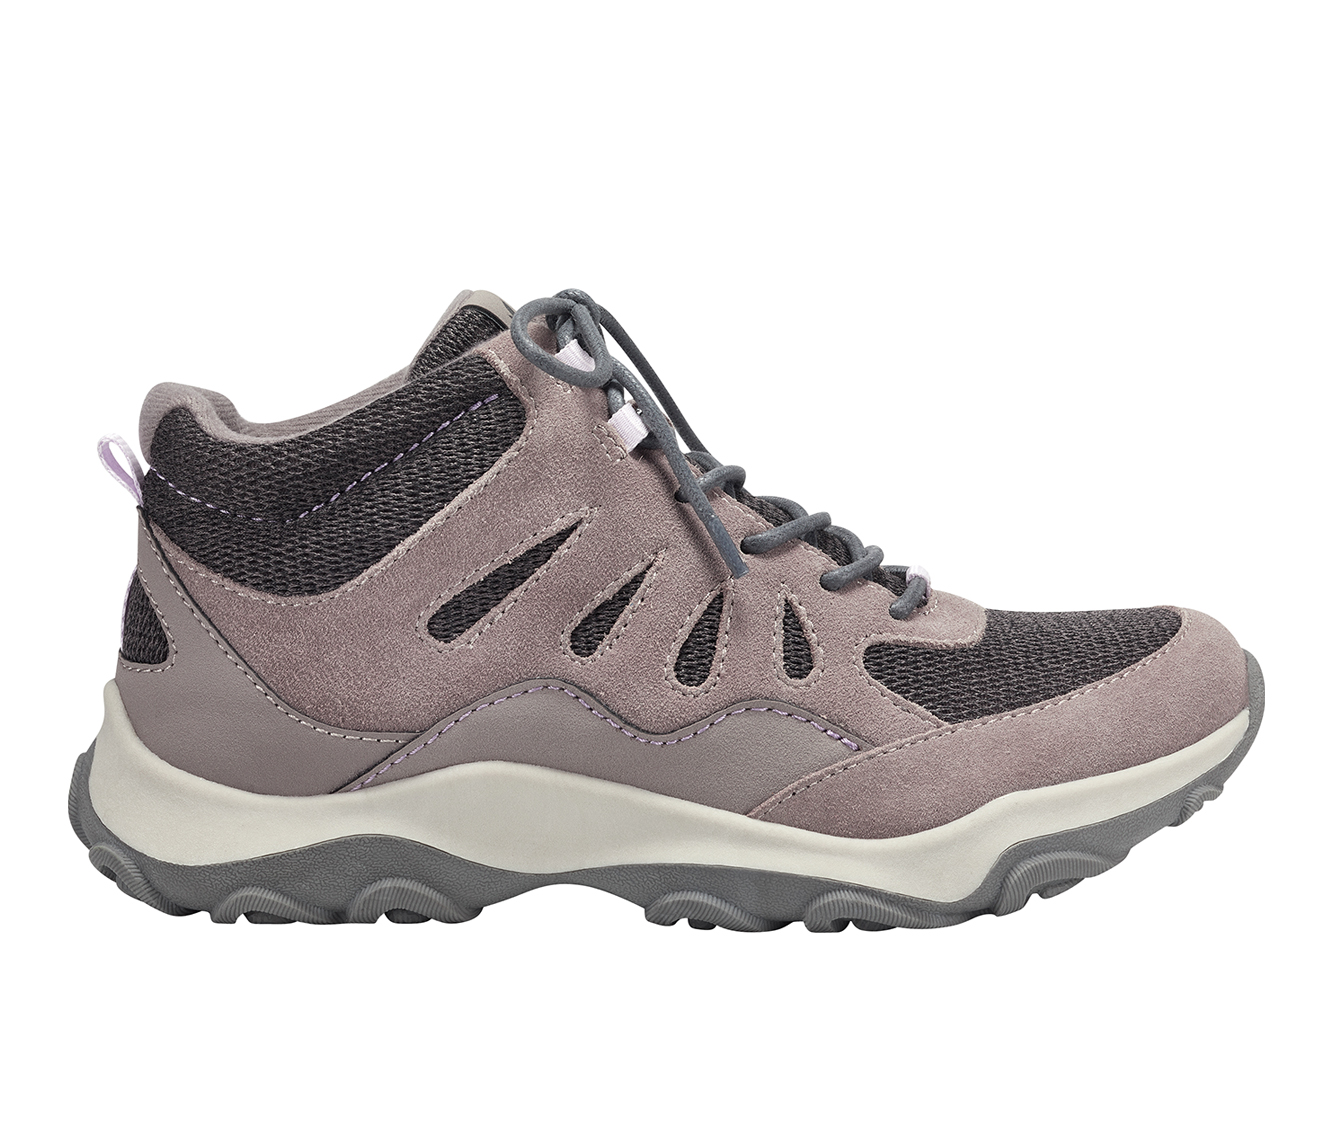 Women’s Earth Origins Tristan Hiking Shoes in Thistle Wide Size 8.5